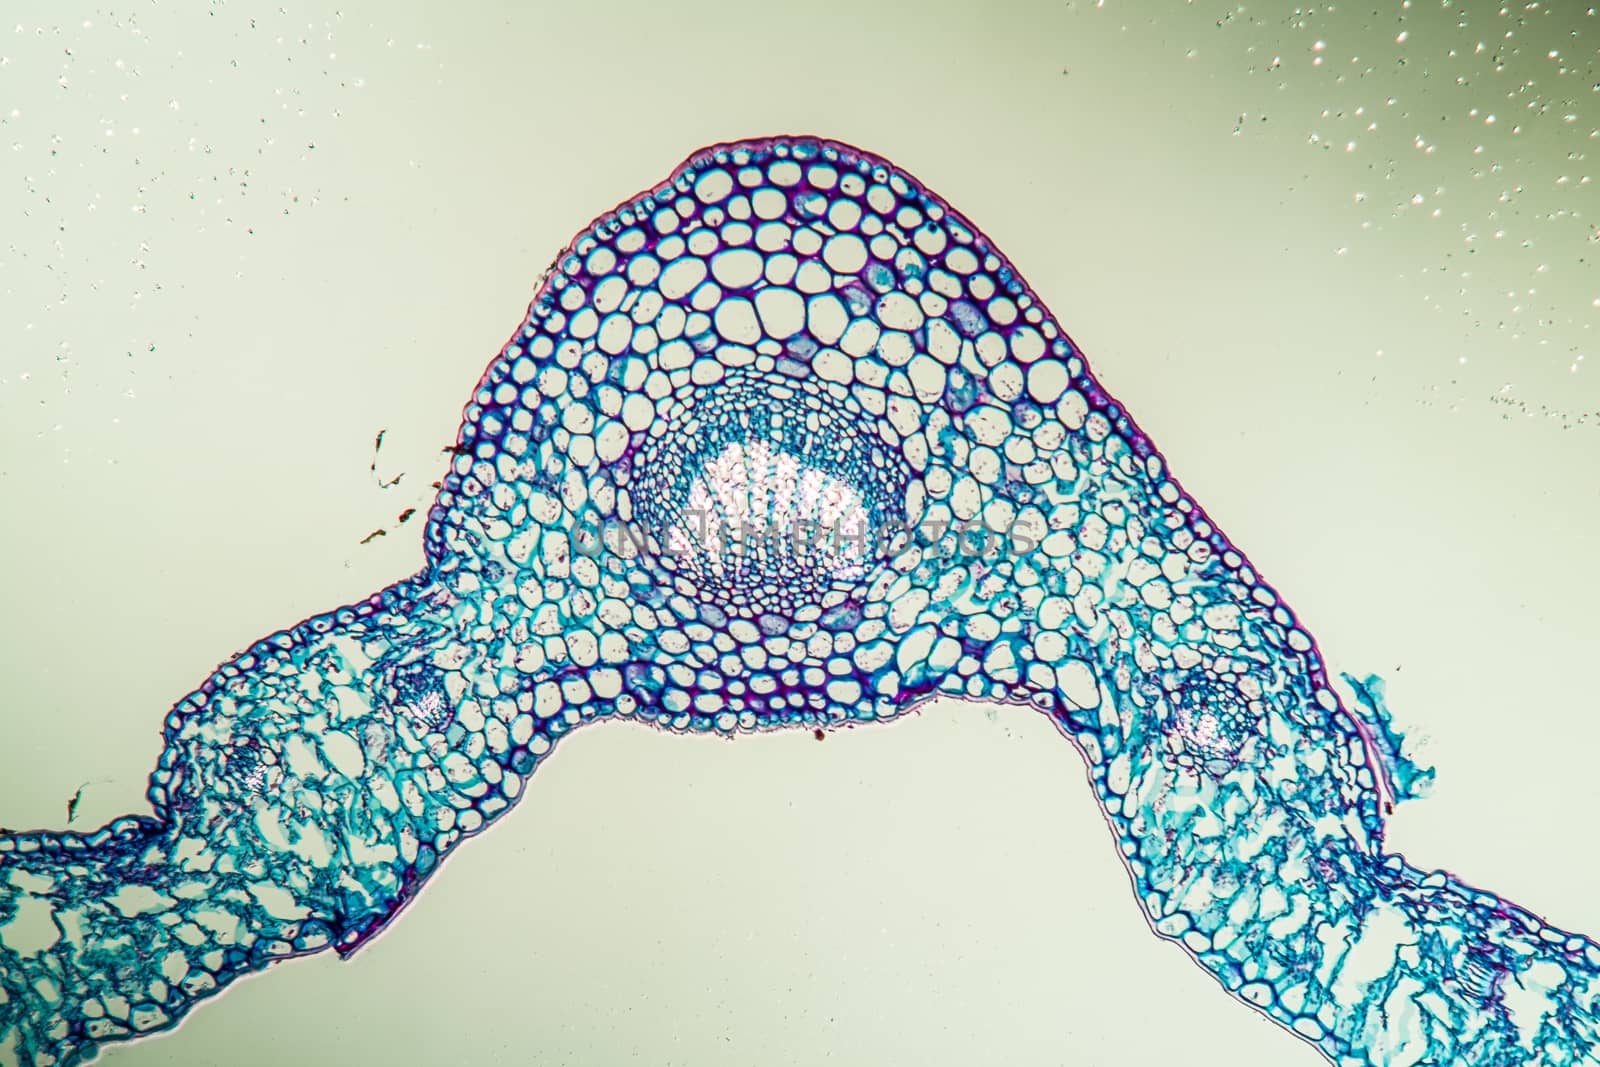 Linguster leaf cross section under the microscope 100x by Dr-Lange